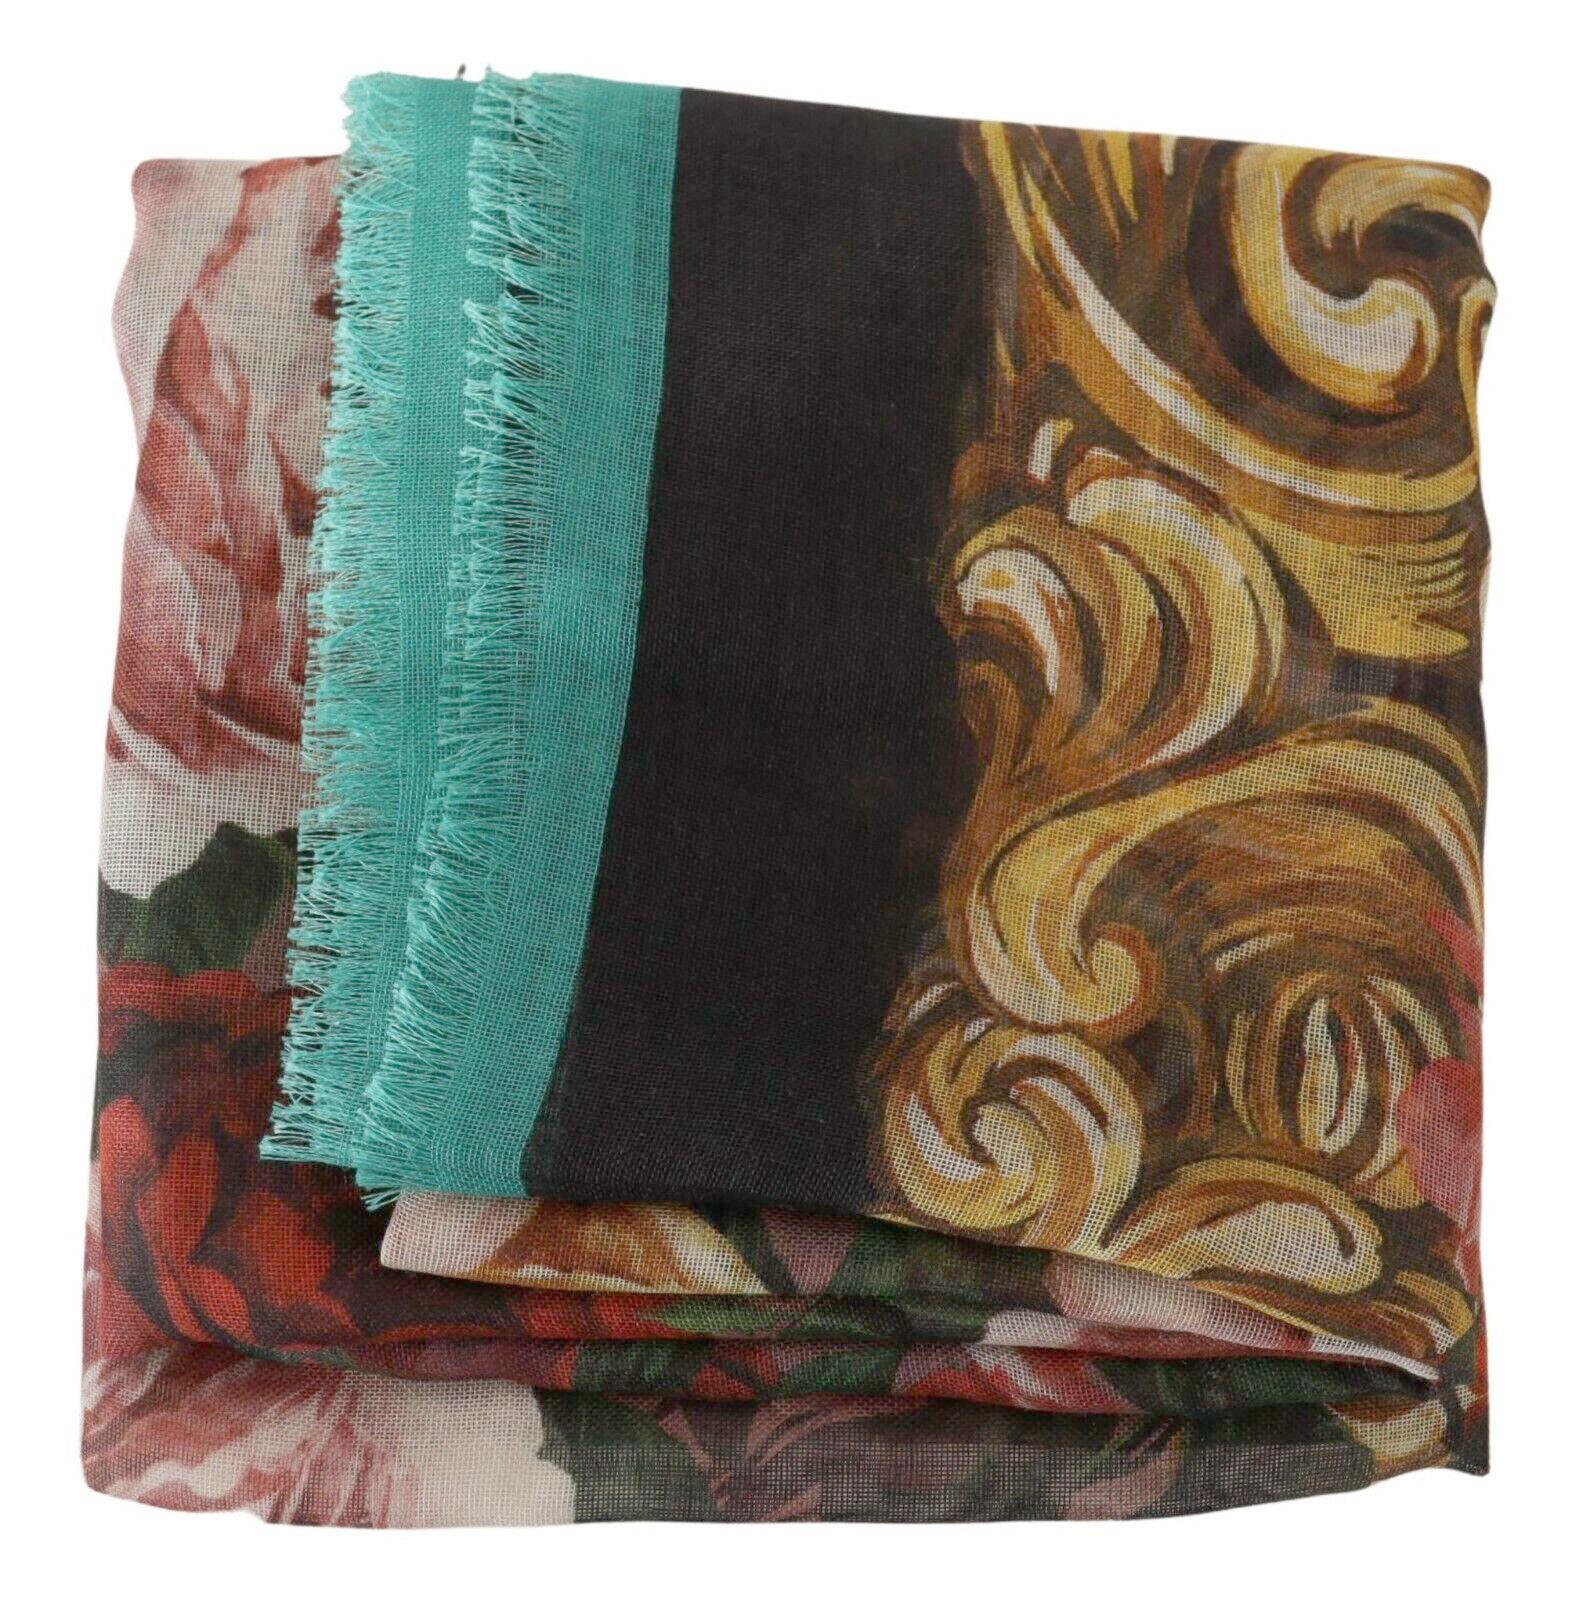 Gorgeous brand new with tags, 100% Authentic Dolce & Gabbana square scarf with floral print crafted from cashmere and silk.


Gender: Women
Color: Multicolor floral print
Material: 70% Cashmere 30% Silk
Logo details
Made in Italy


Size: 140cm x